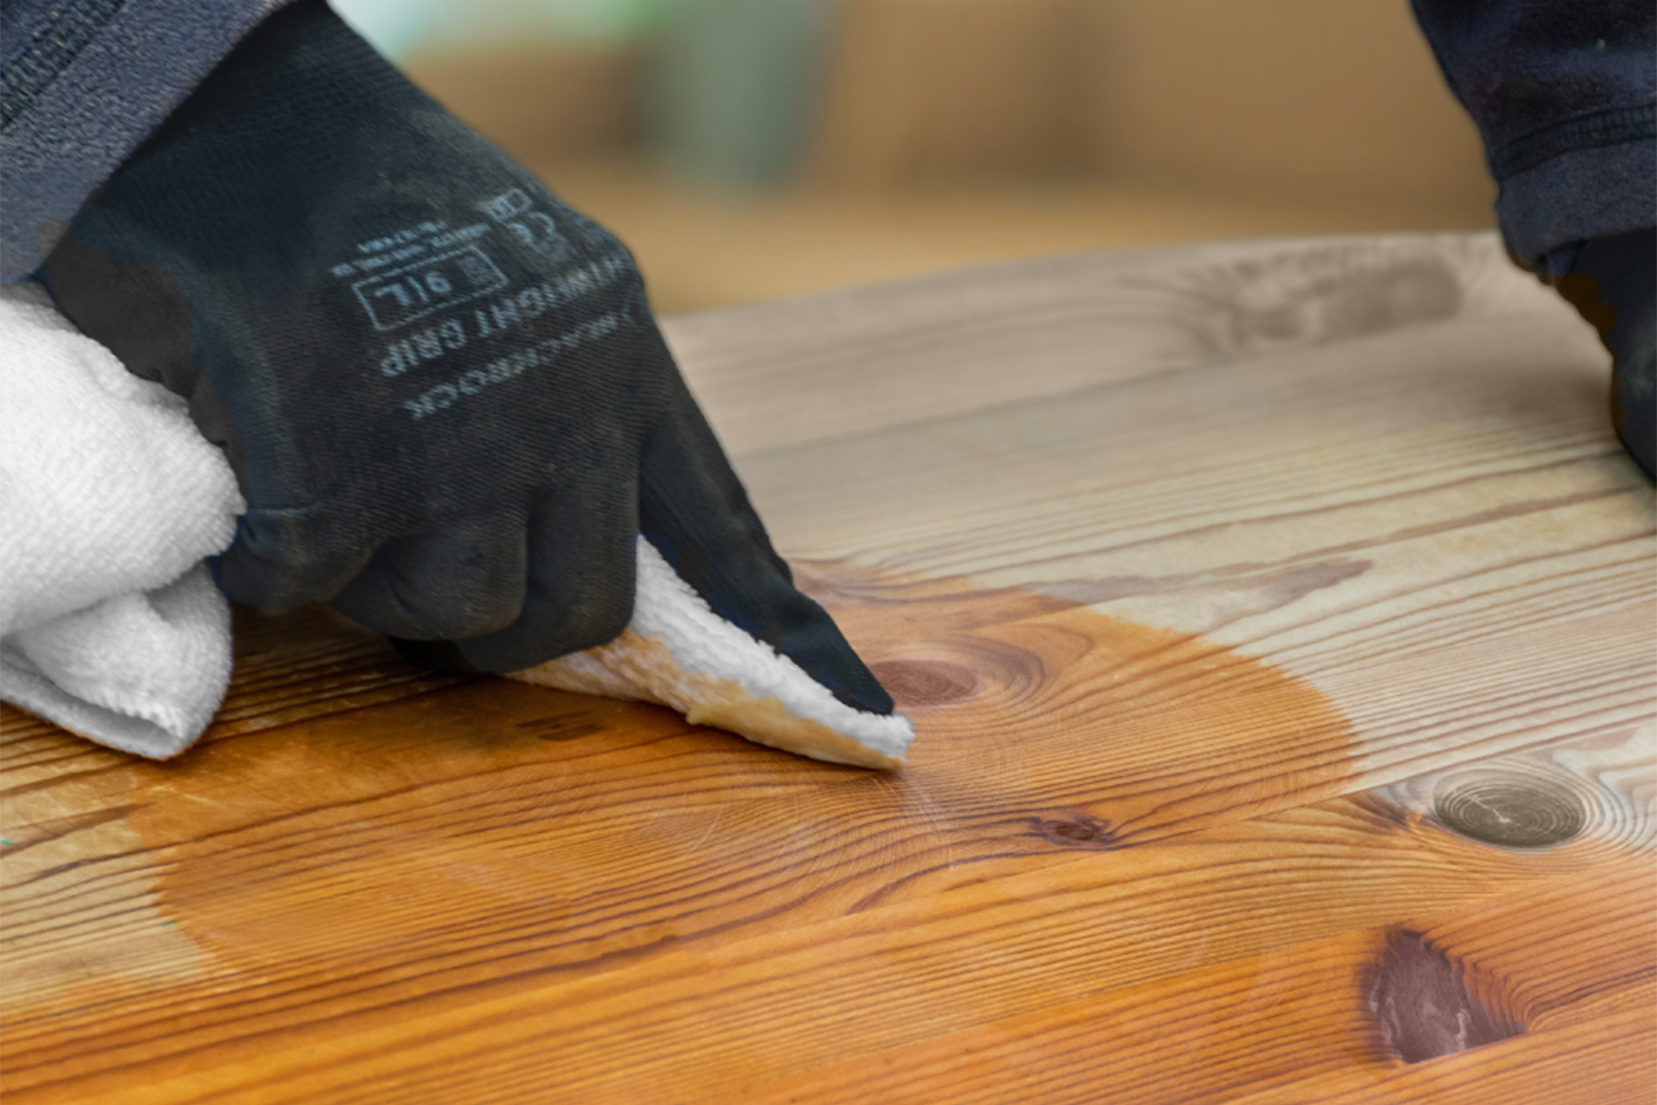 How to use wood varnish - Safeguard Europe